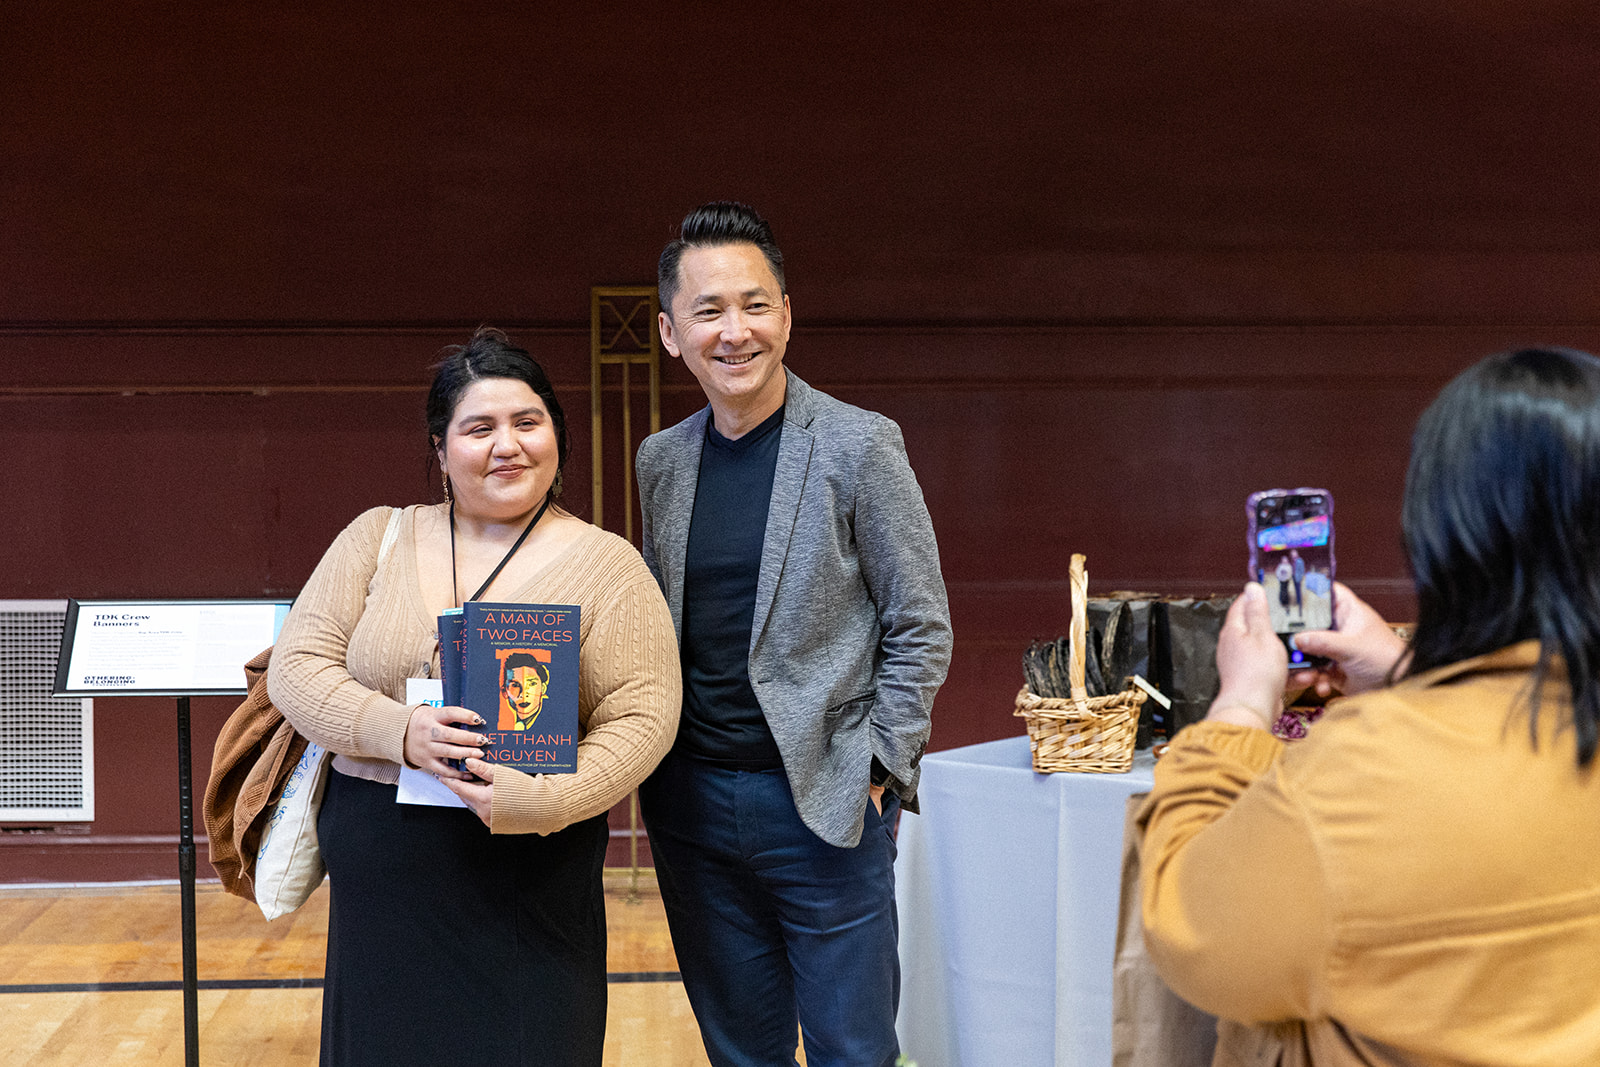 Viet Thanh Nguyen and a fan pose together